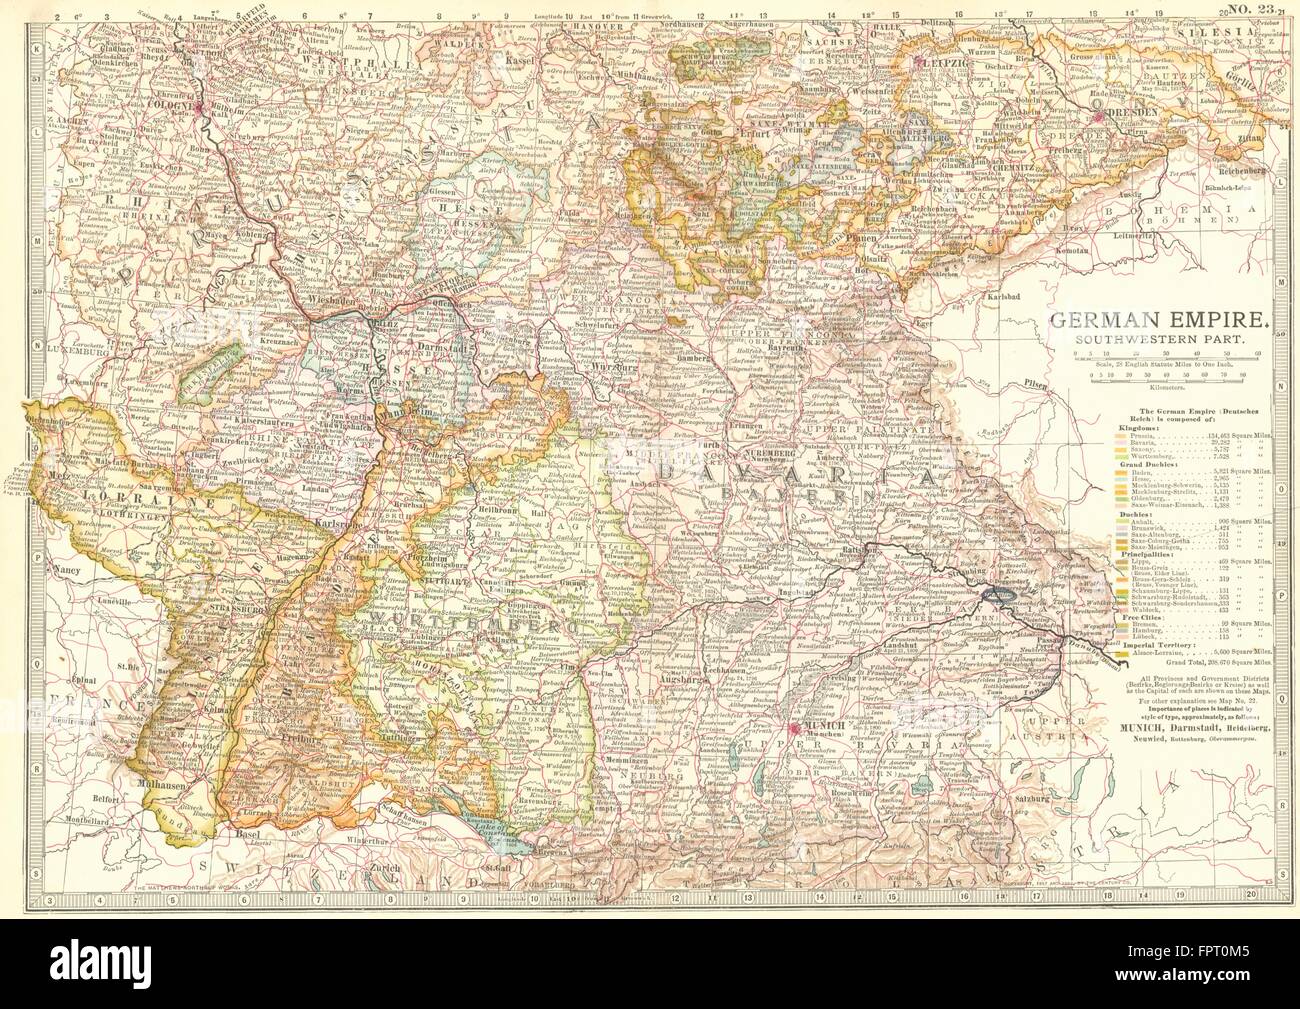 GERMANY: German Empire, SW, 1903 antique map Stock Photo